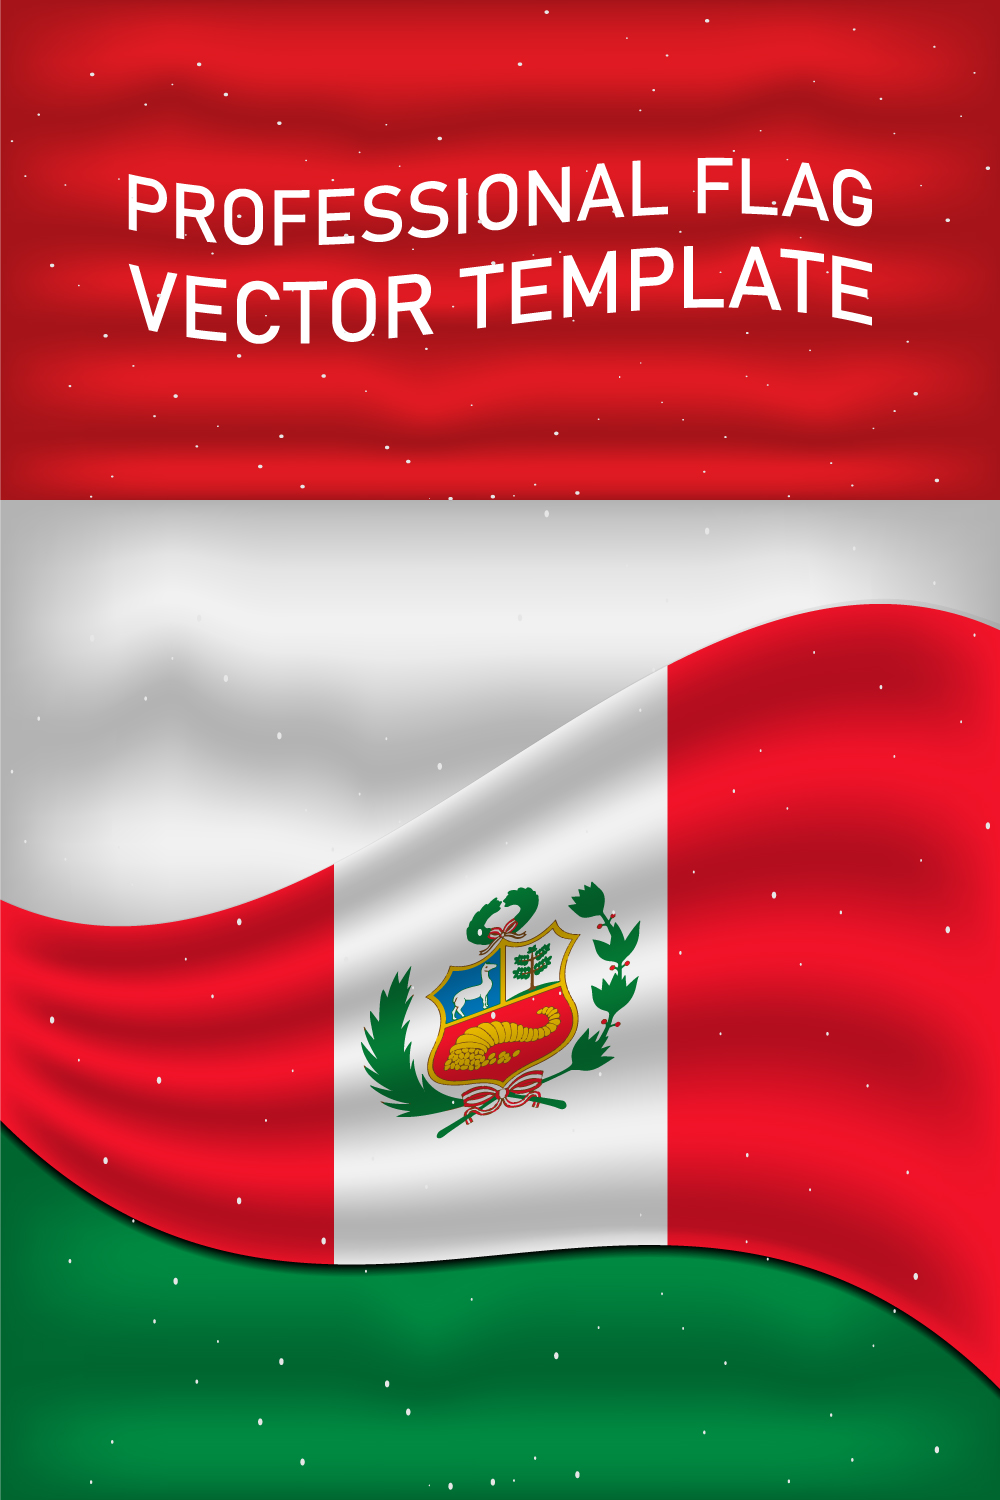 Irresistible image of the flag of Peru.